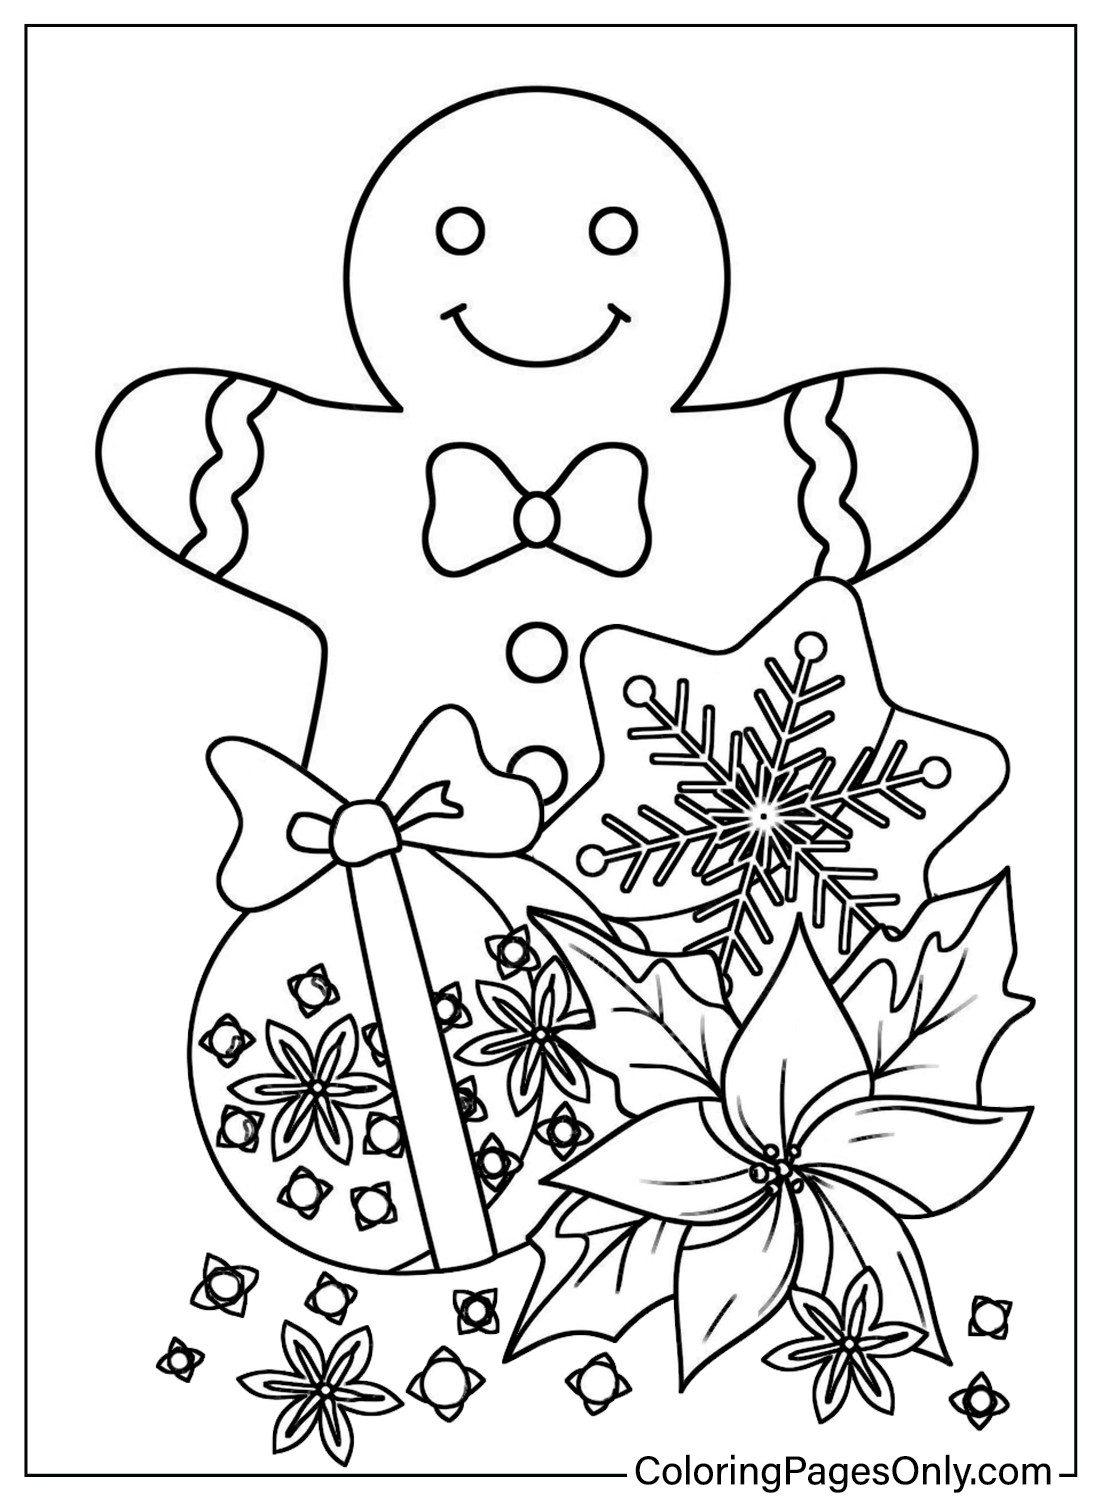 Coloring Sheets Gingerbread Man from Gingerbread Man